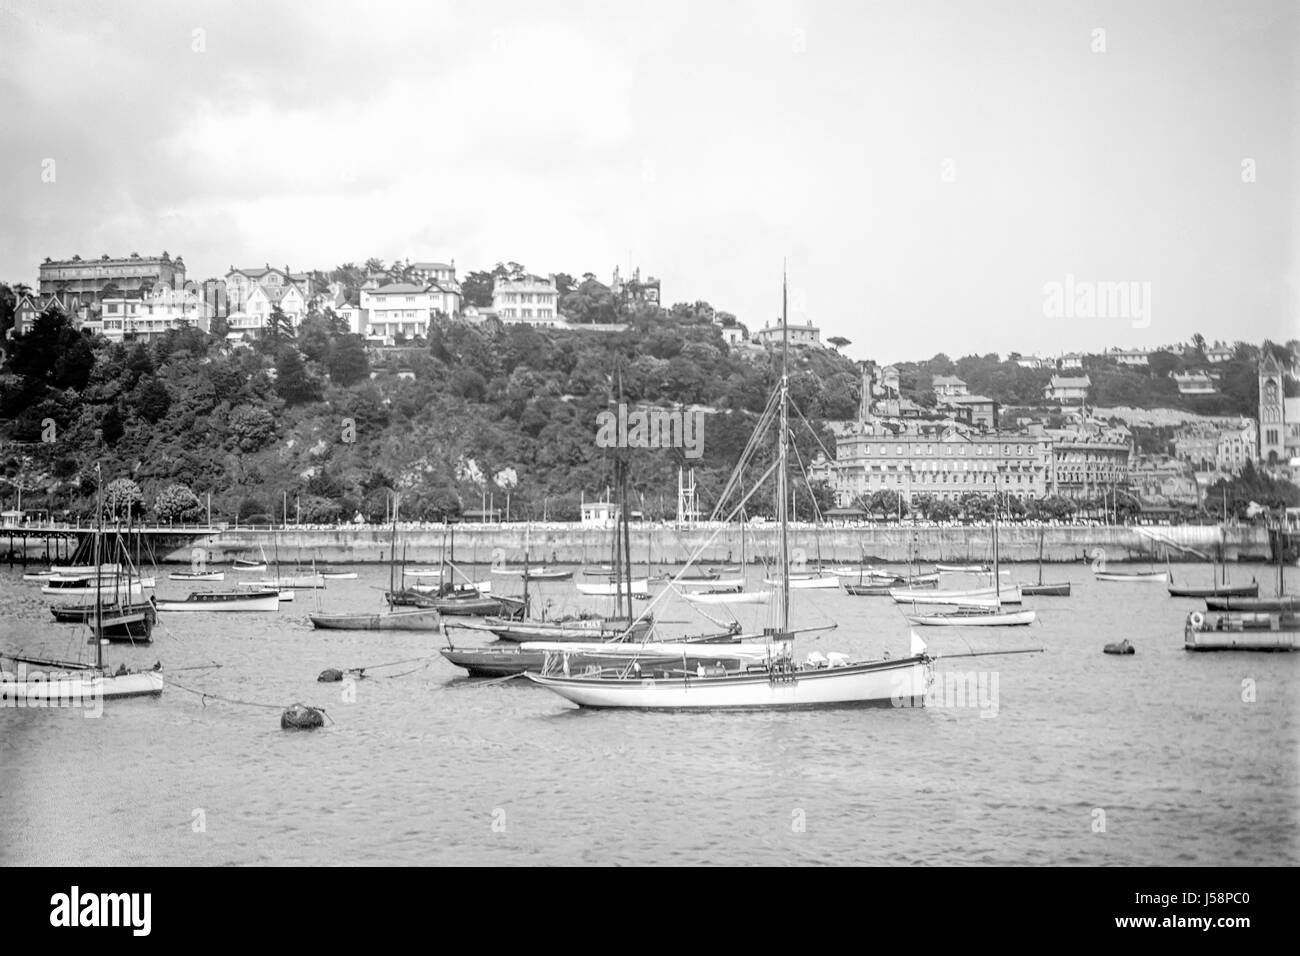 Torquay, Devon, seafront with boats anchored in the bay viewed from the sea. Photographed in 1920. Restored from a high resolution scan taken from the original negative. Stock Photo